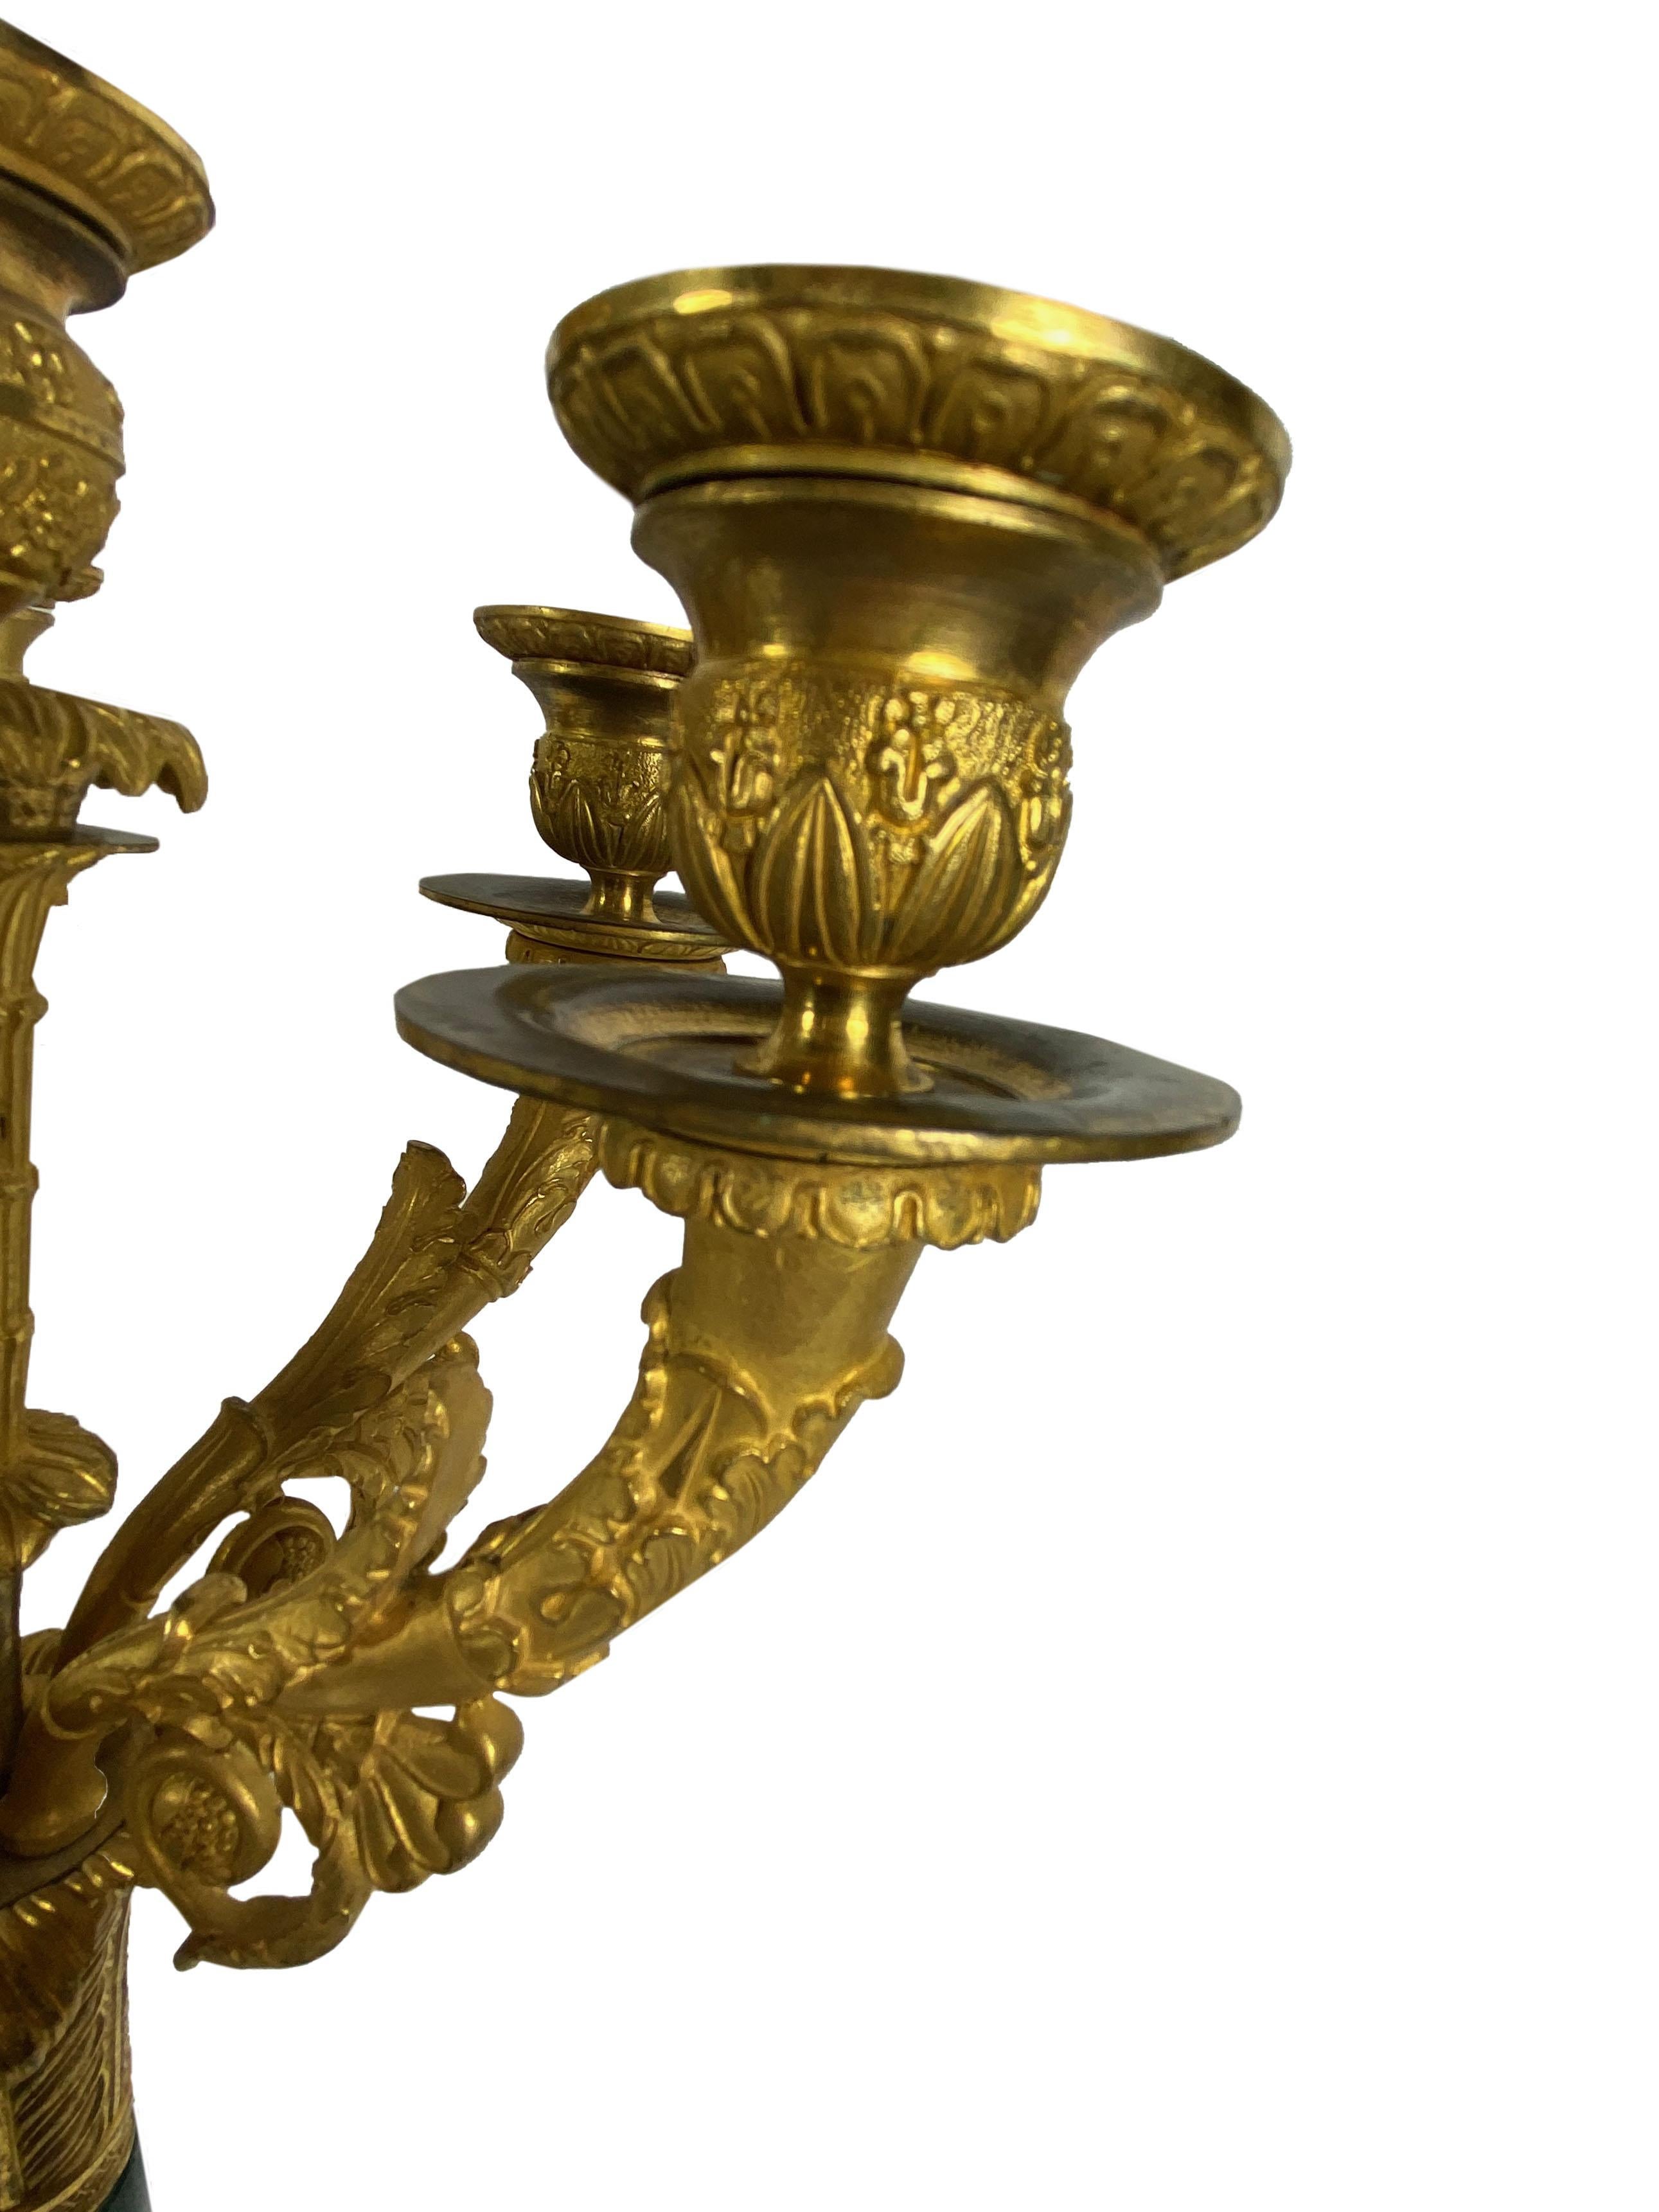 1870 French Empire Style Bronze Dore Candleholders, a Pair For Sale 1